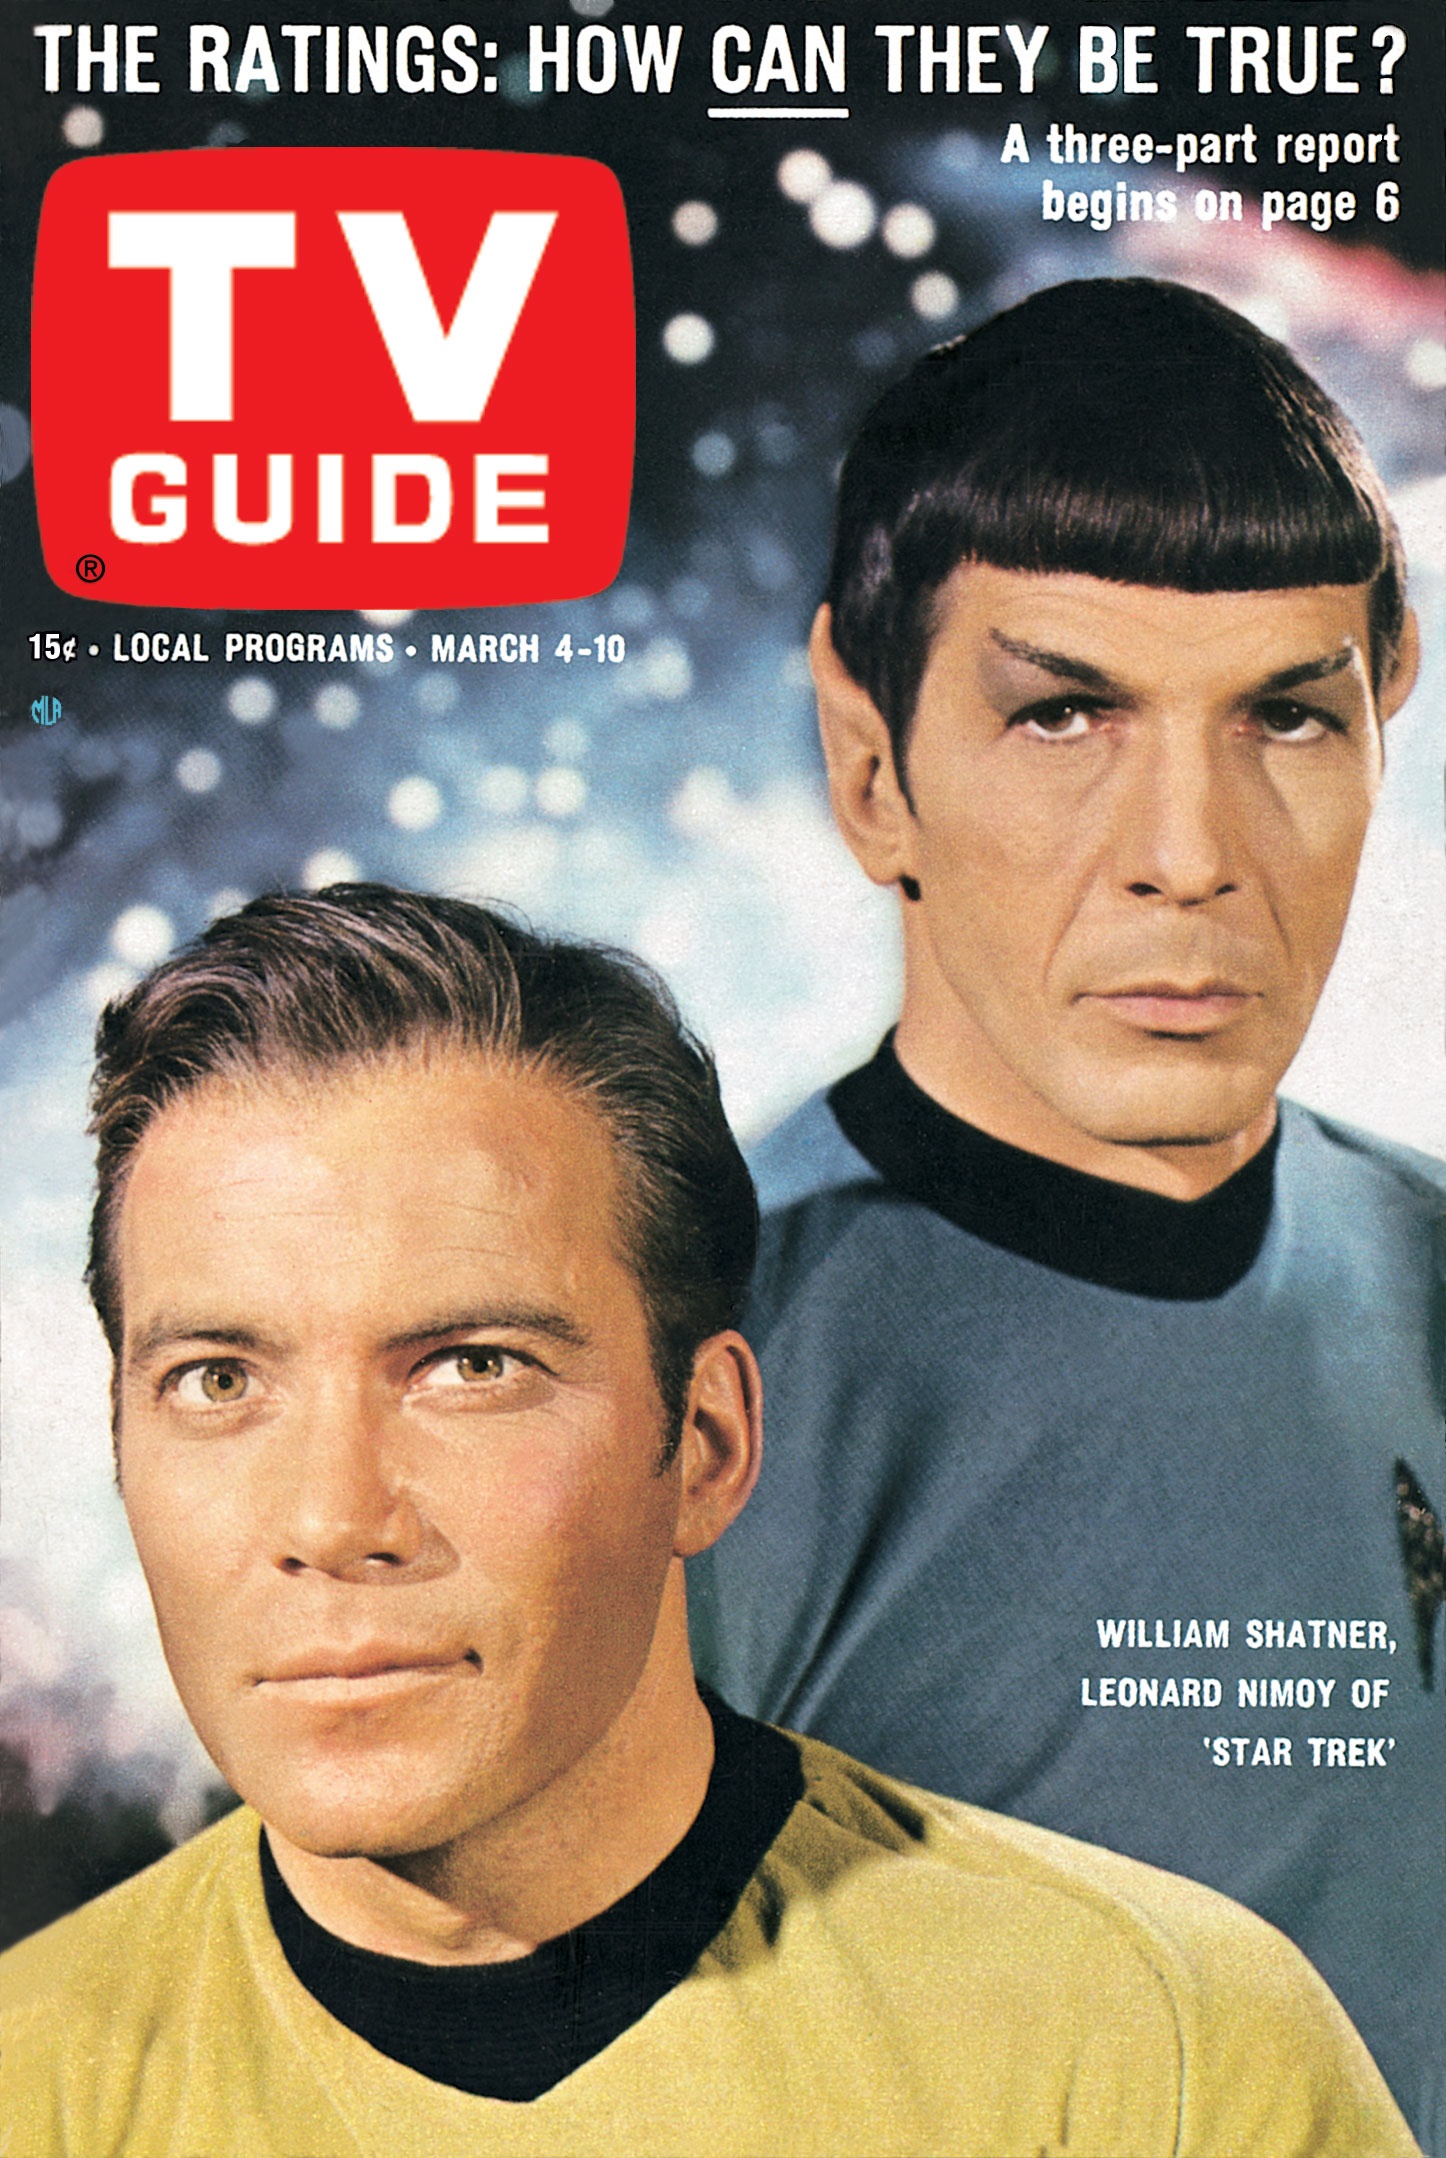 Star Trek S First Tv Guide Cover Mission Log Podcast